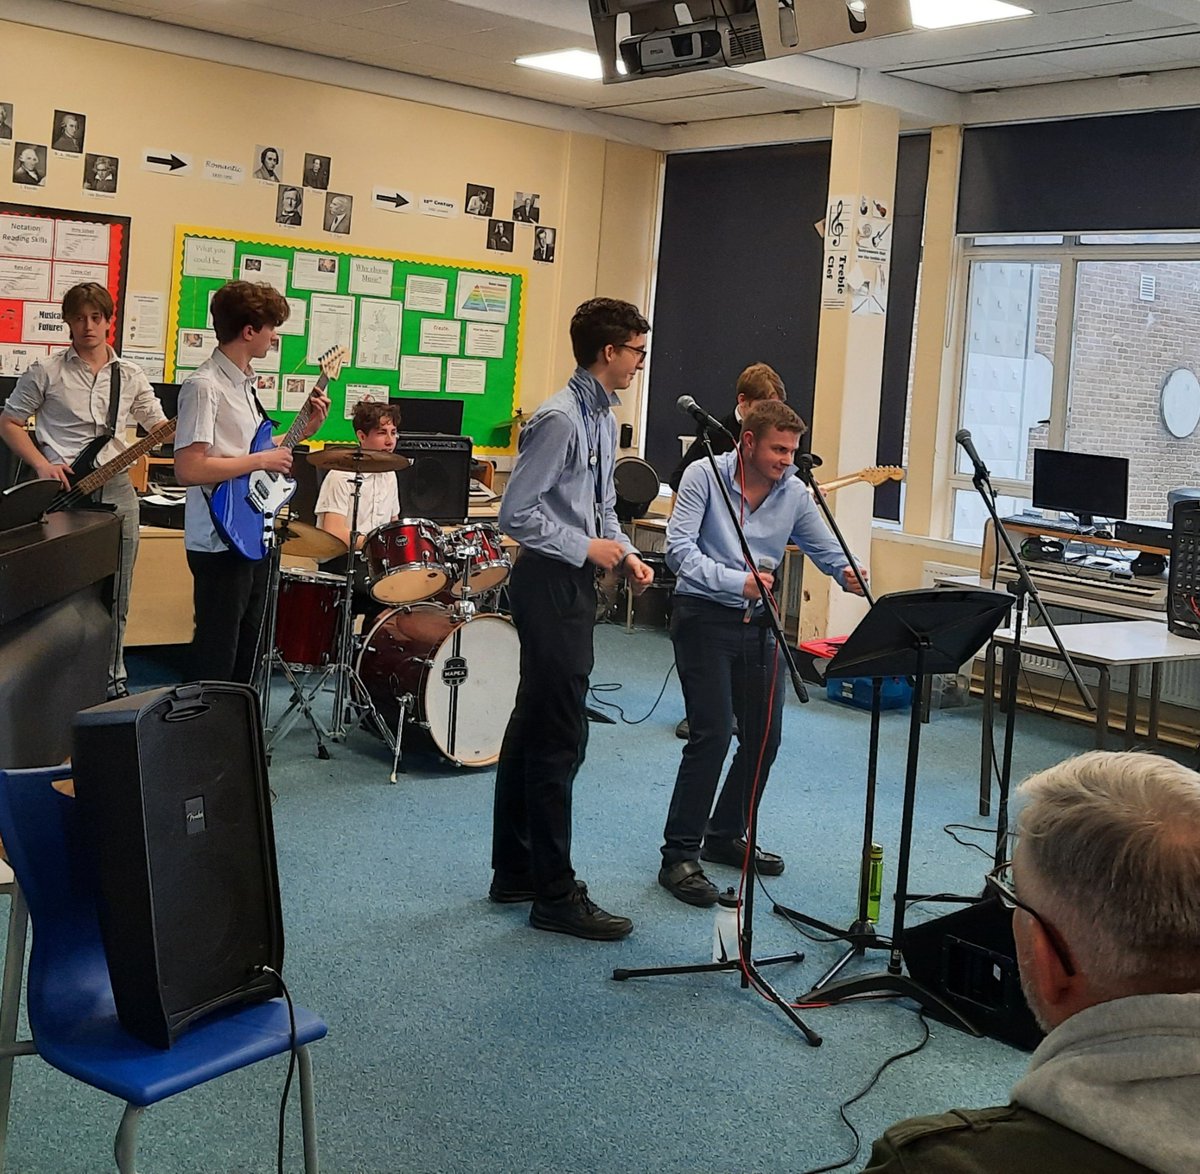 The students at #Rock School were awsome last week during their sounds of the #60s showcase! It was amazing experience watching students from #Year7 to #Year12 work together to create some amazing #Music #KingJohn #KingJohnSchool #KJS #Benfleet #Community #Zenith